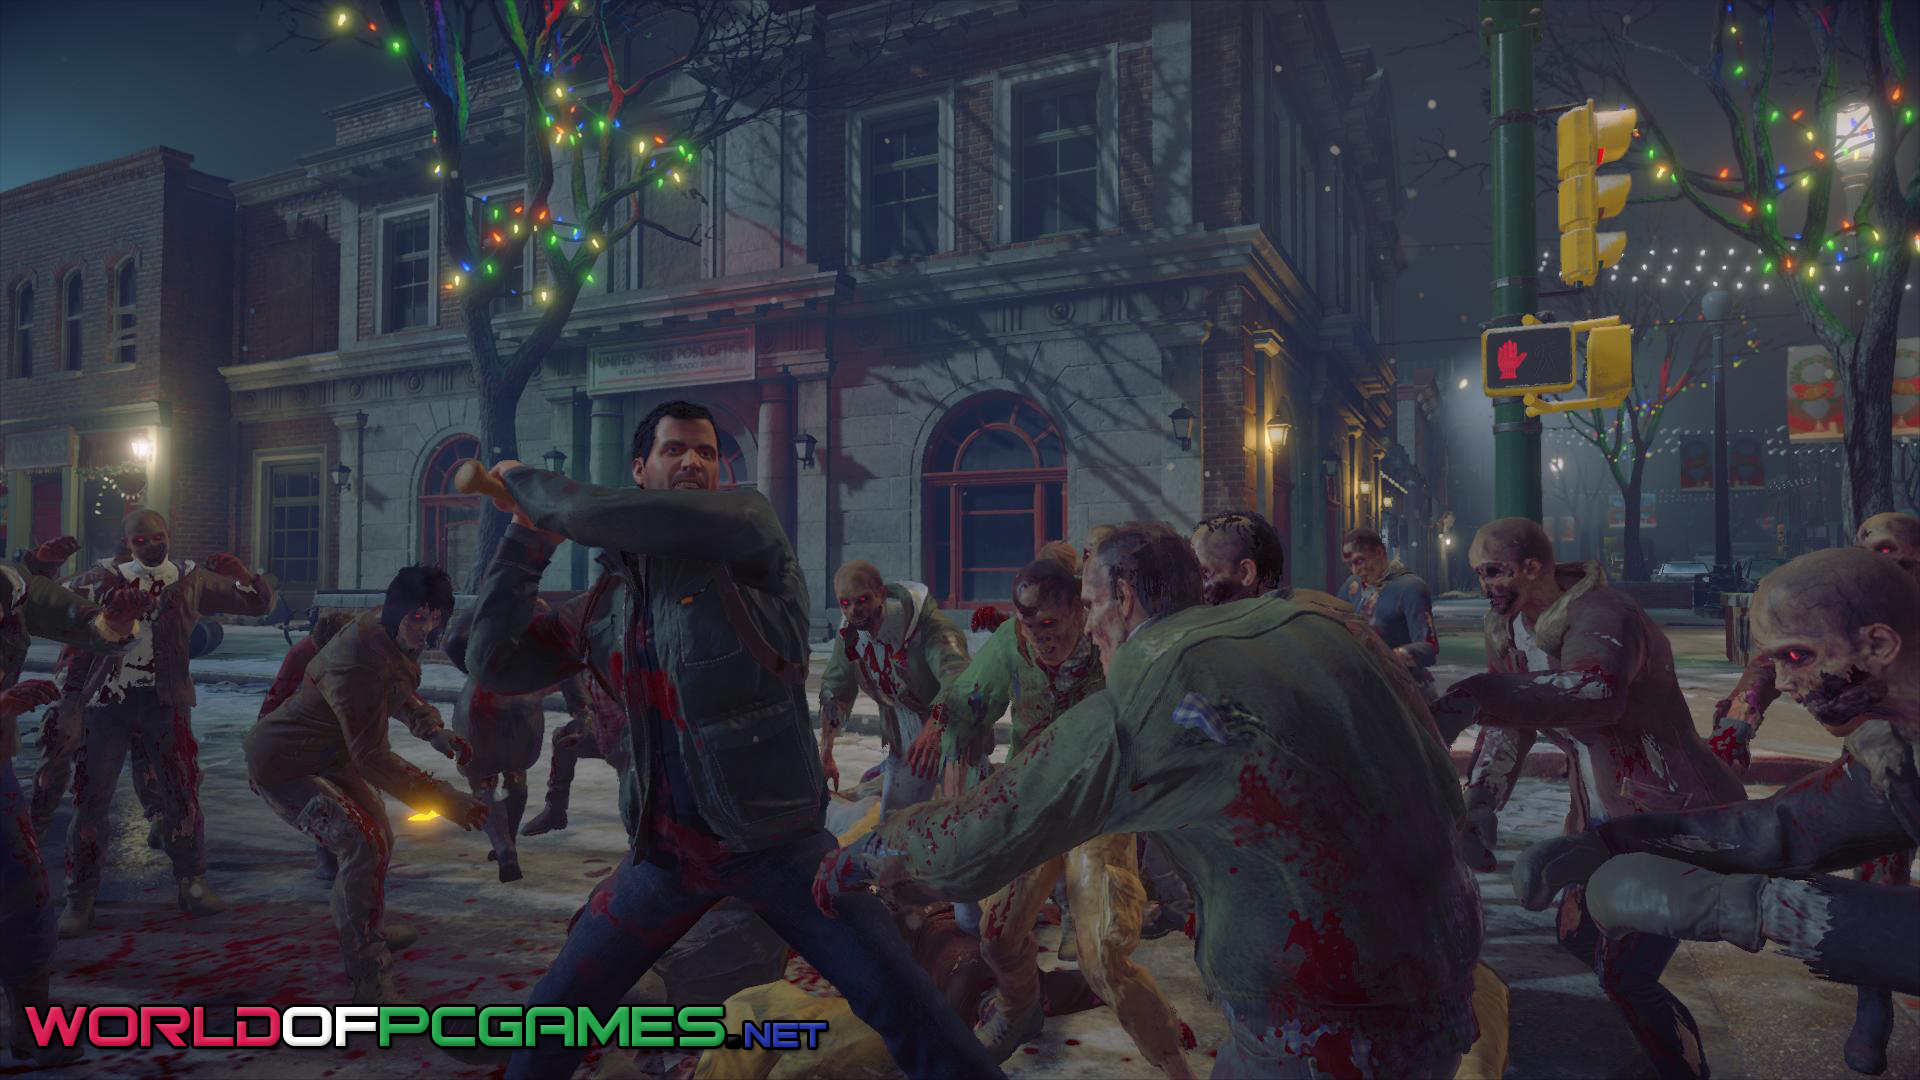 Dead Rising 4 Free Download By worldof-pcgames.net